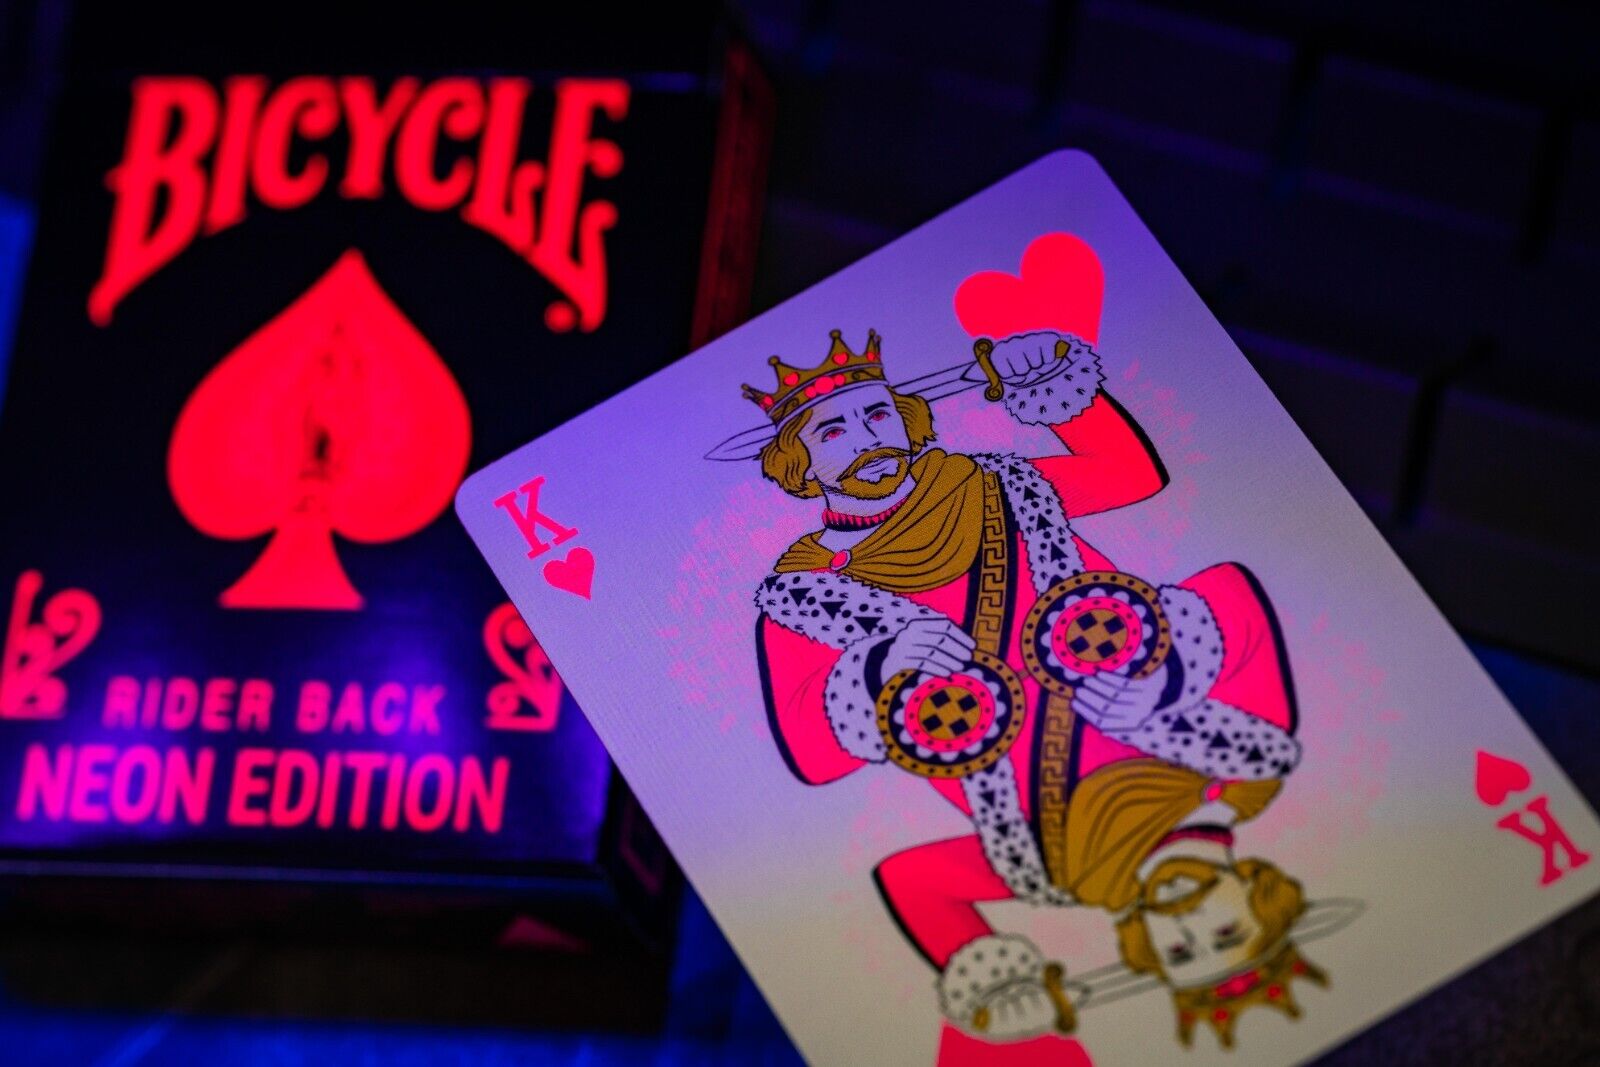 Bicycle NEON Edition Playing Cards PINK UV_GLOW Deck | By: Card-Addiction.com